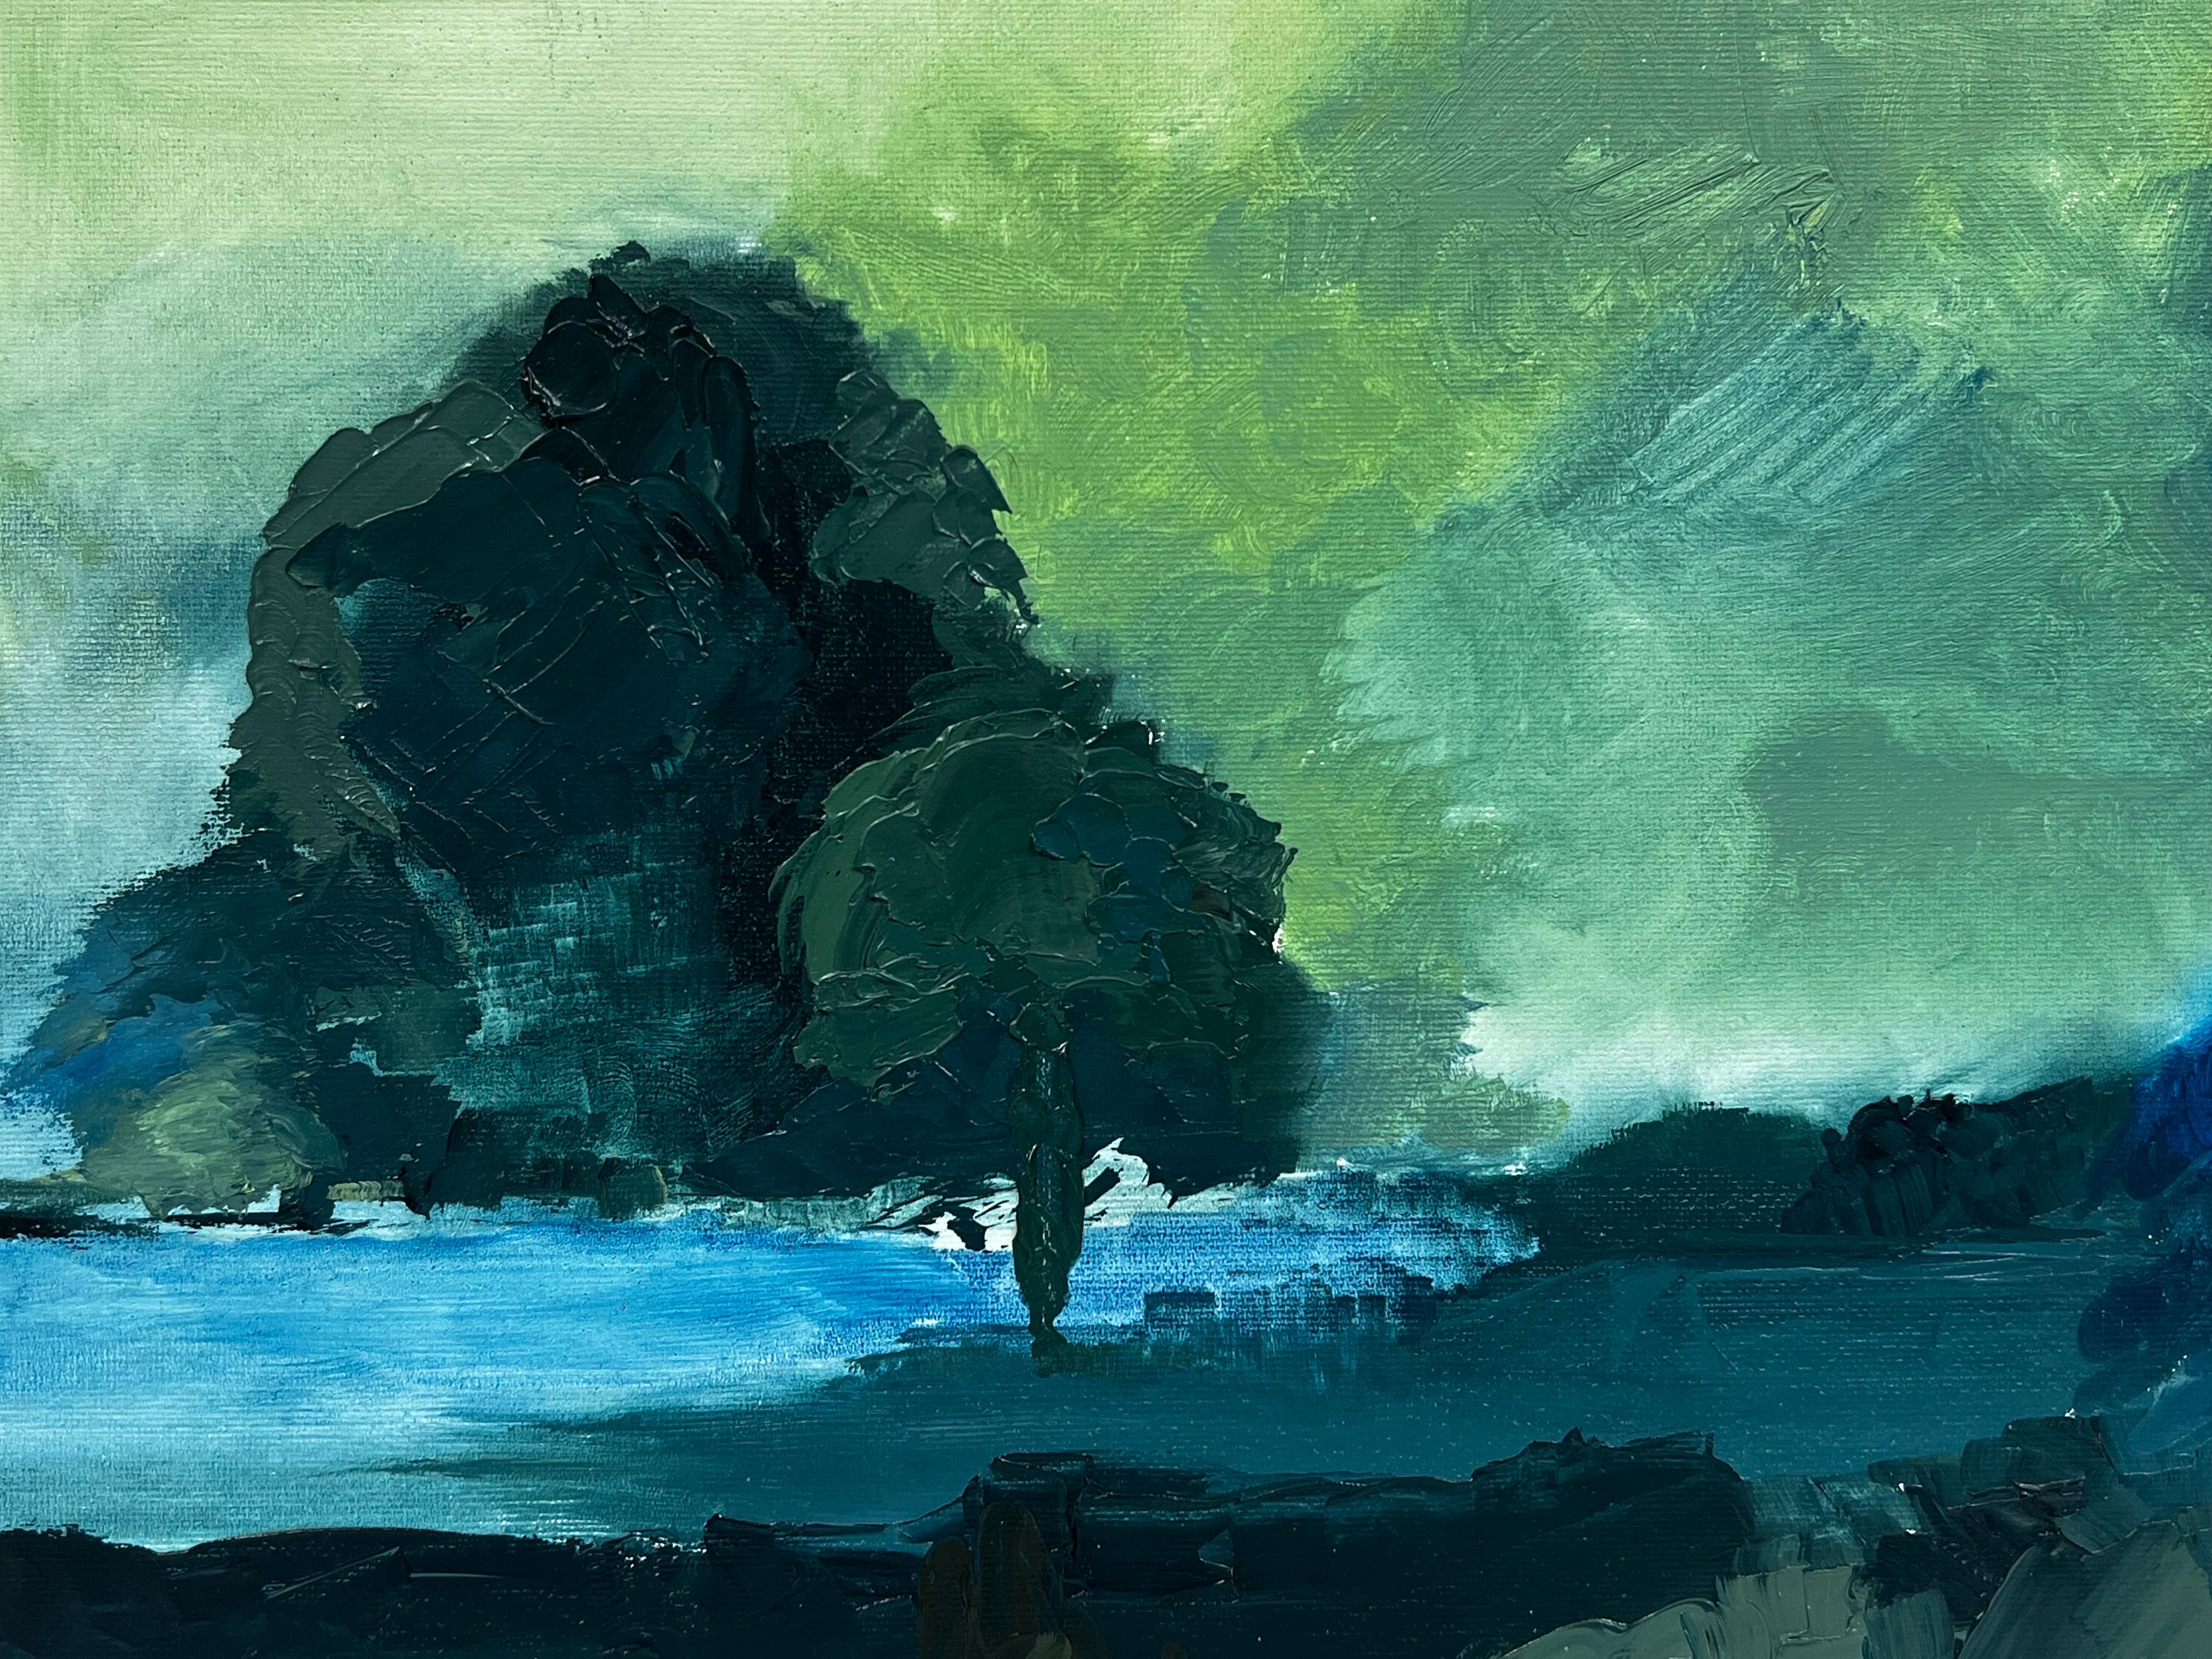 Atmospheric Moody Blue Landscape with Tree & Pond Brooding Skies, modern art - Painting by British contemporary